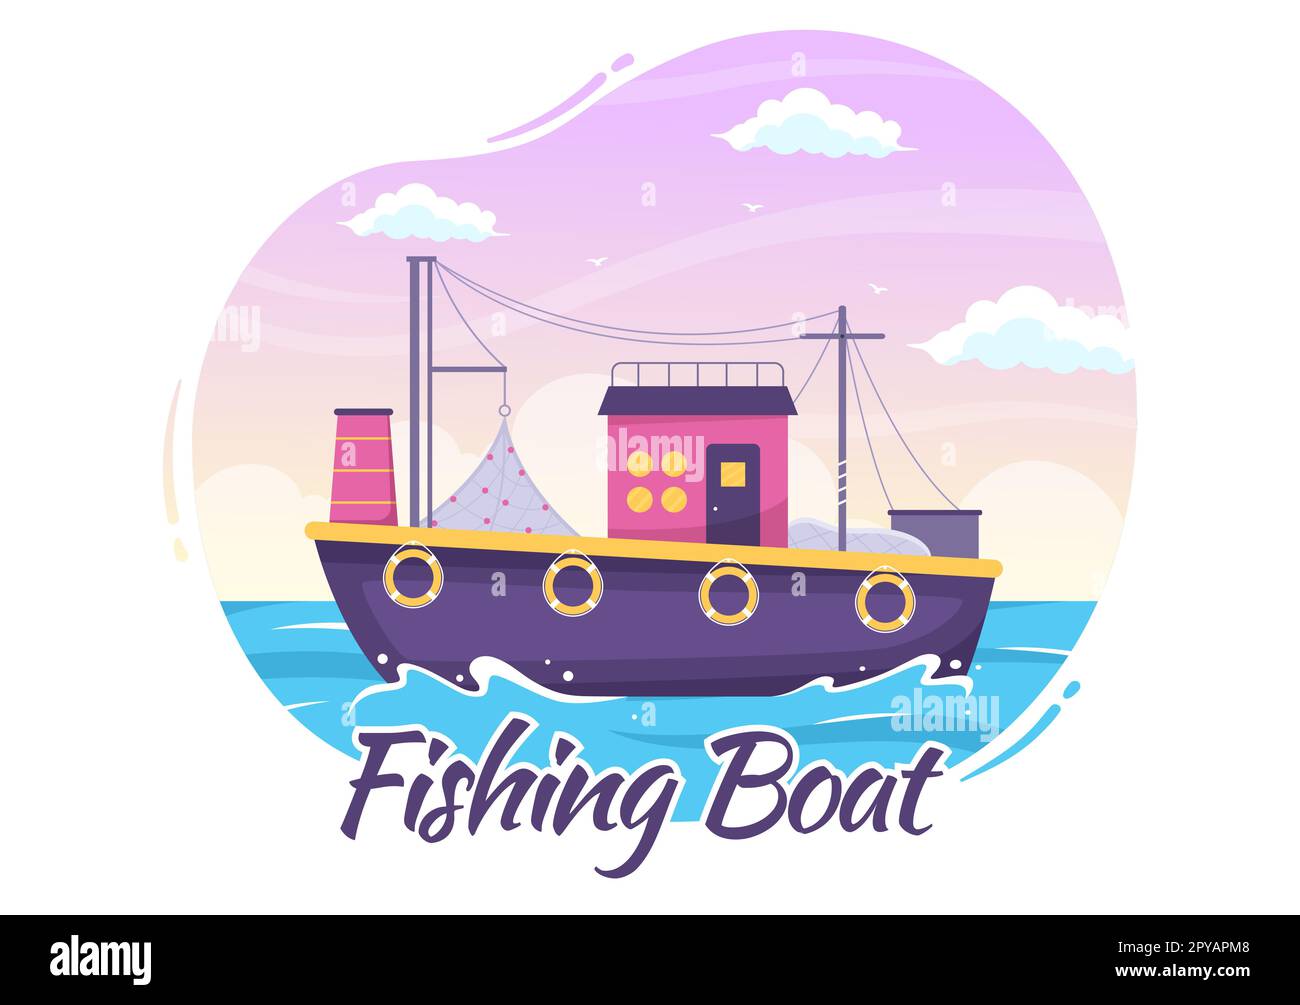 Fishing Boat Illustration with Fishermen Hunting Fish Using Ship for Web Banner or Landing Page in Flat Cartoon Hand Drawn Vector Templates Stock Photo